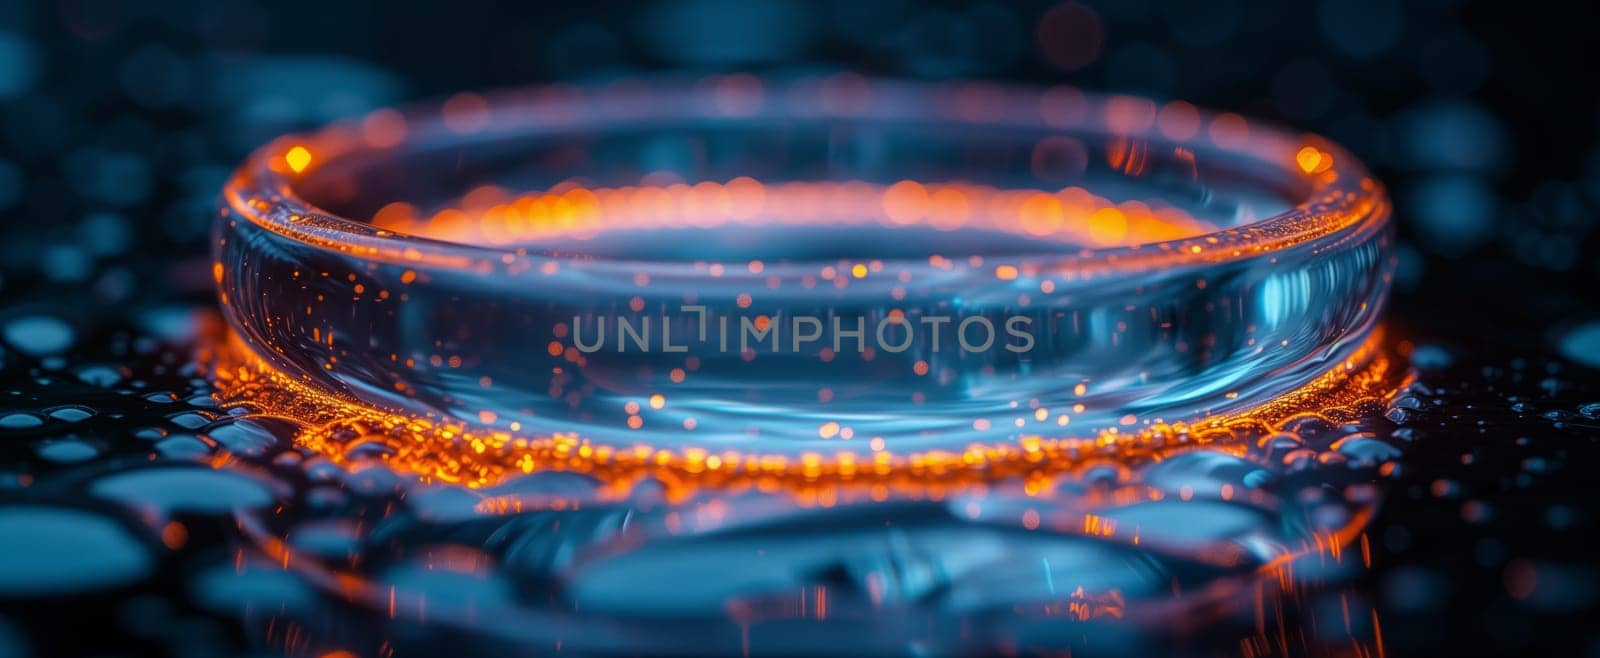 A detailed shot capturing the mesmerizing light emitting from a glass filled with water, creating an electric blue glow. A perfect blend of art and technology